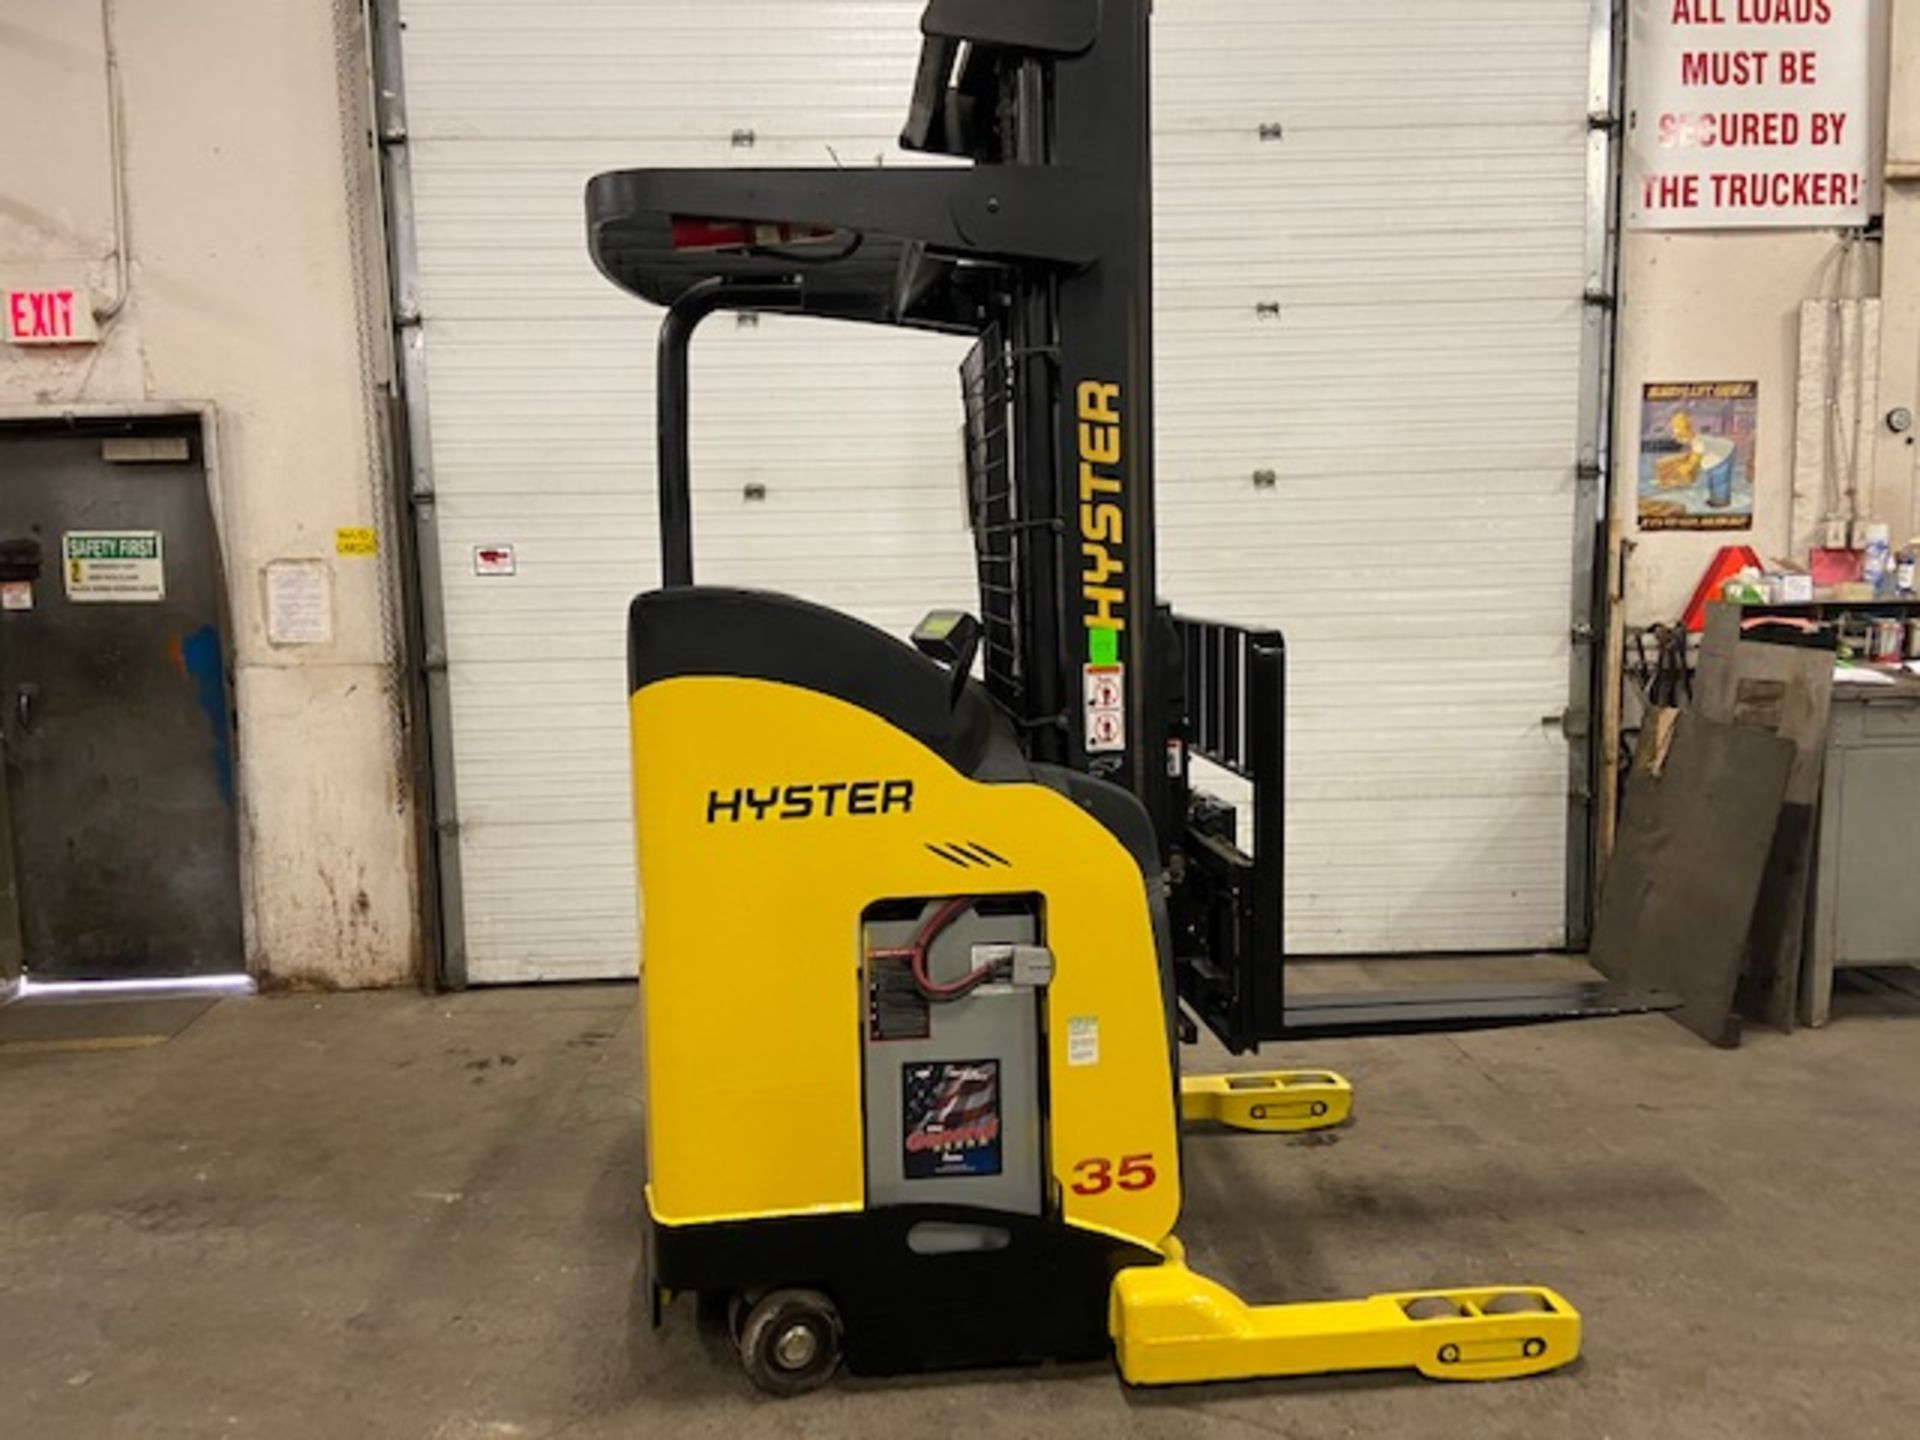 FREE CUSTOMS - Hyster Reach Truck Pallet Lifter REACH TRUCK electric 3500lbs with sideshift 3-